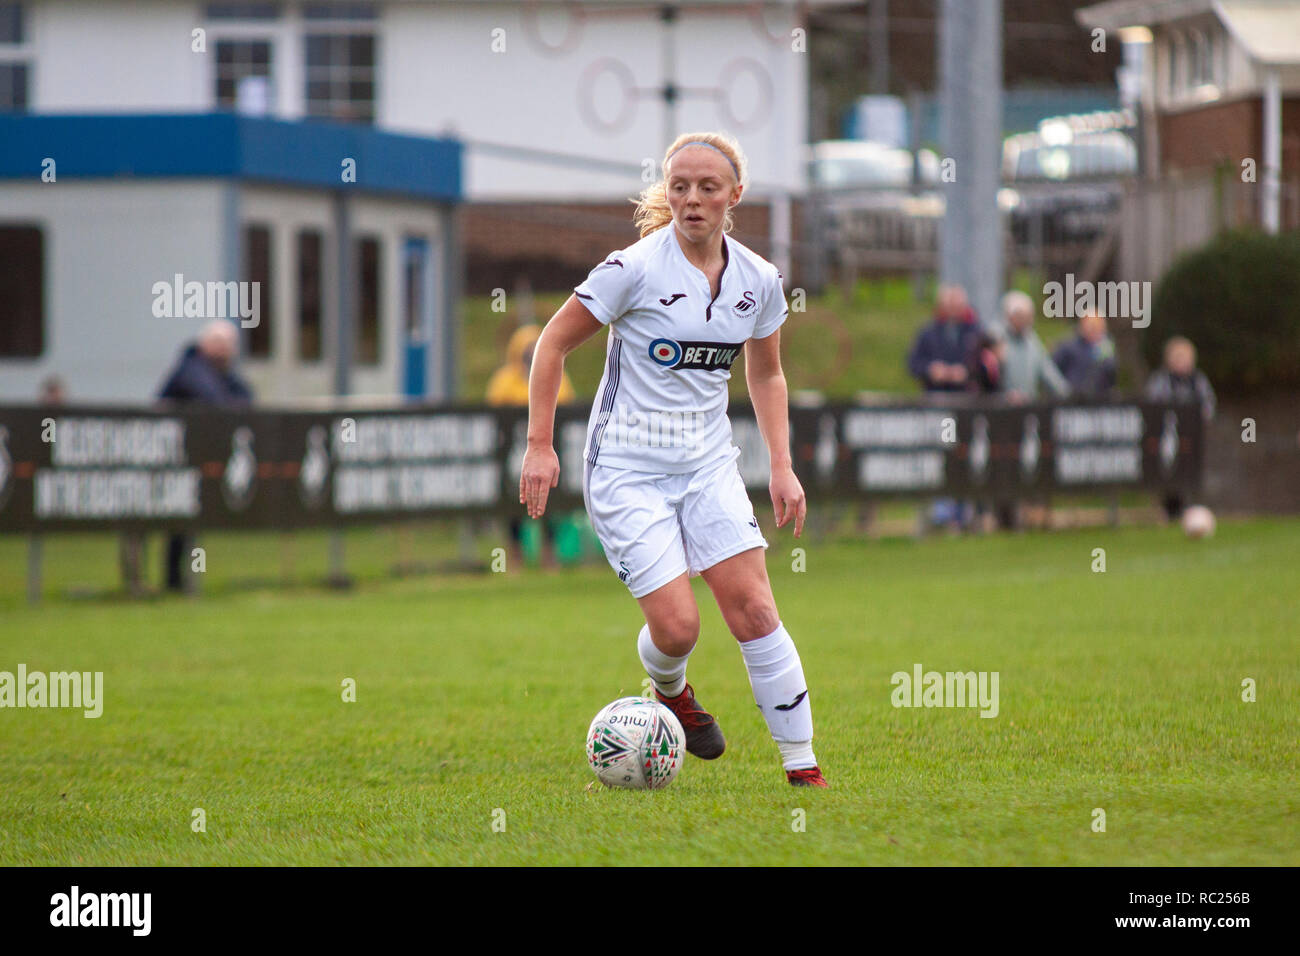 Swansea City Ladies Host Cardiff City Women In The Women S Welsh Premier League At Llandarcy Academy Of Sport Lewis Mitchell Ycpd Stock Photo Alamy